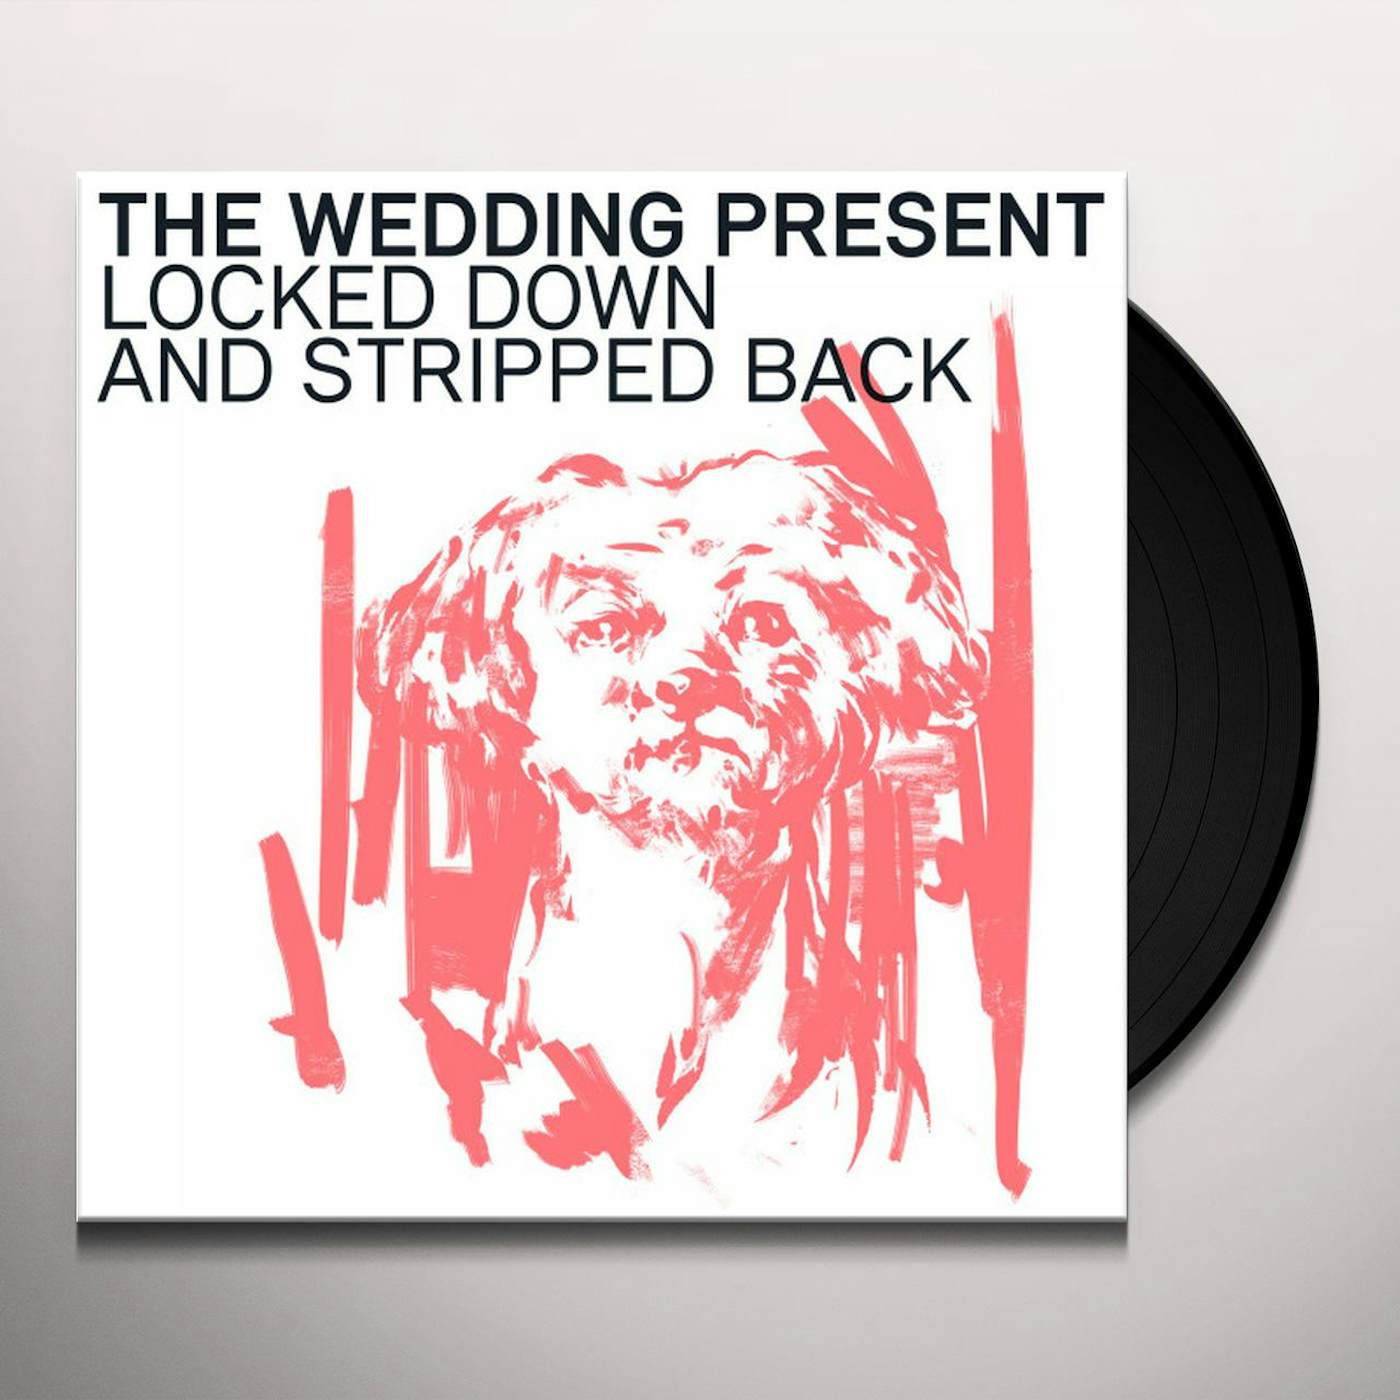 The Wedding Present Locked Down and Stripped Back Vinyl Record